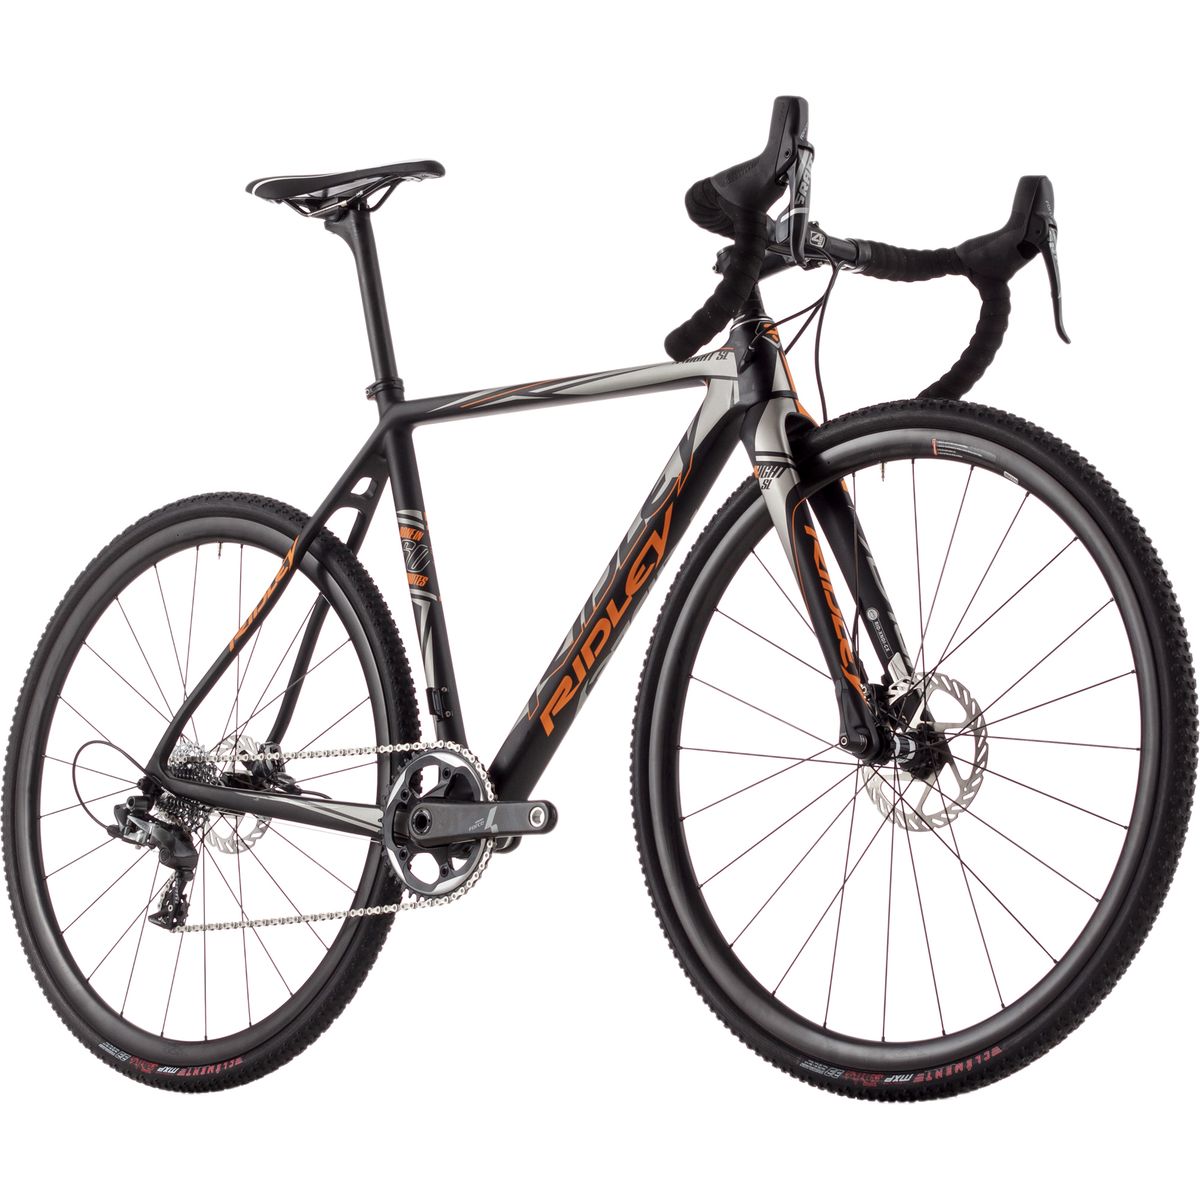 Ridley X-Night SL 10 Disc Force 1 Complete Cyclocross Bike - 2017